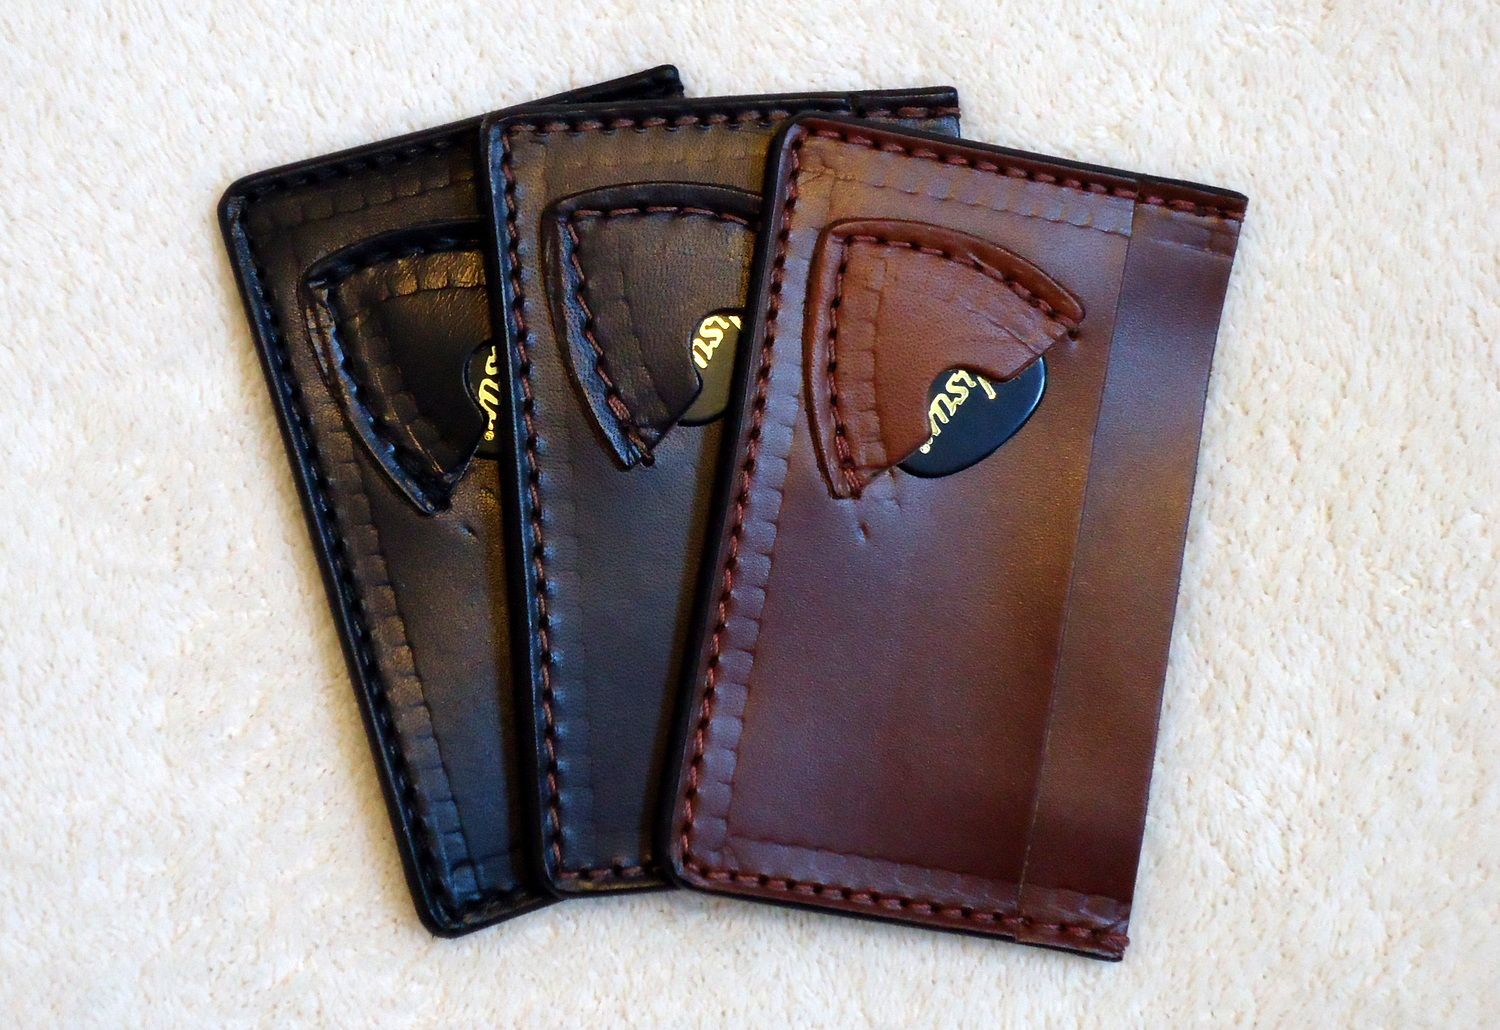 Buy a Hand Crafted Personalized Leather Guitar Pick/Plectrum Id Wallet, made to order from Texas ...